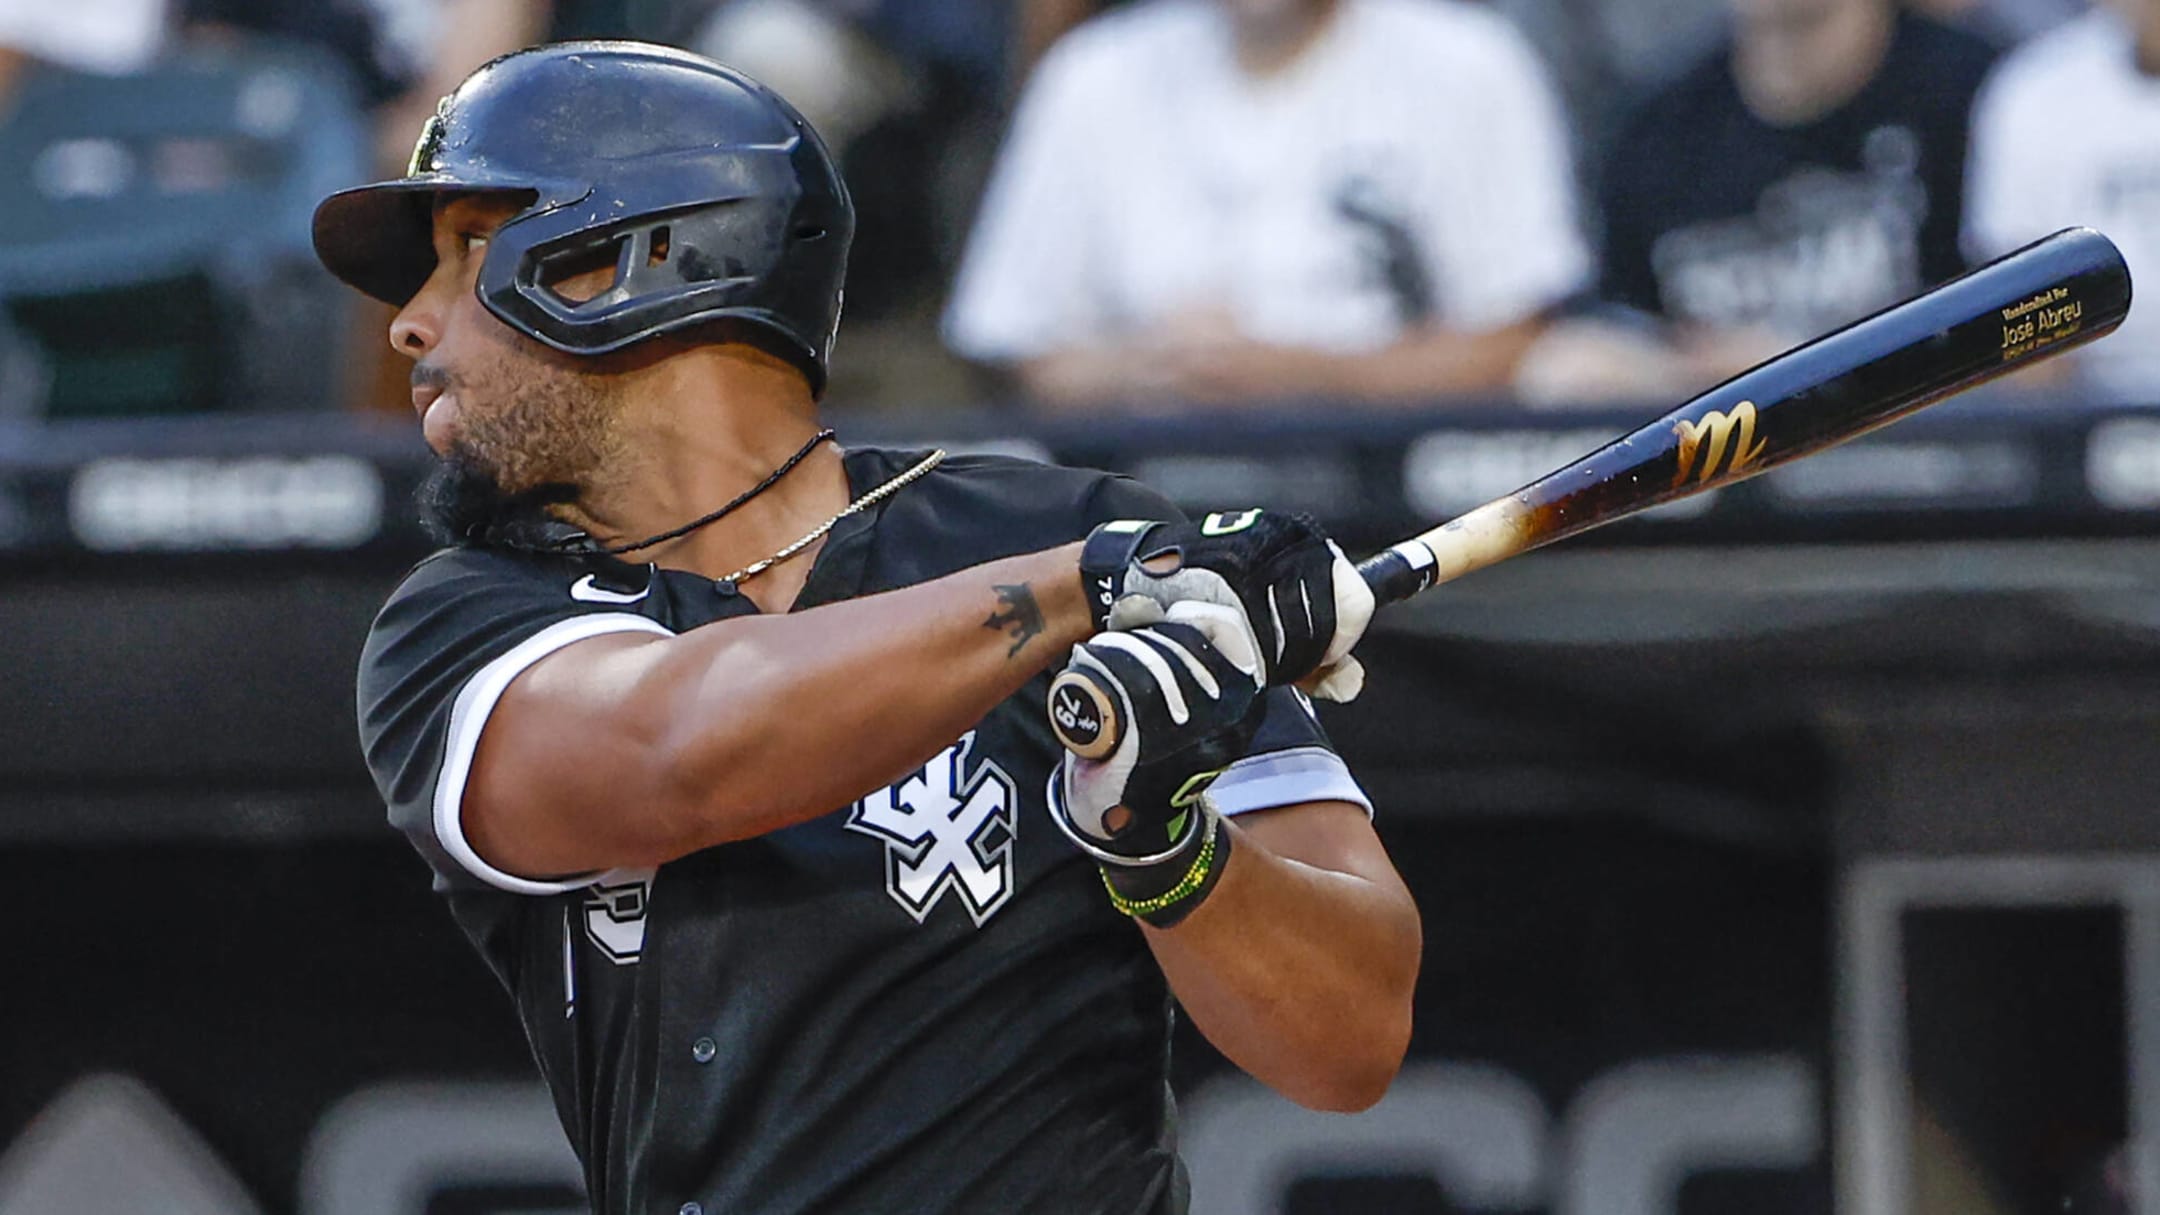 MLB Breaking News: Free Agent First Basemen Jose Abreu Signs With